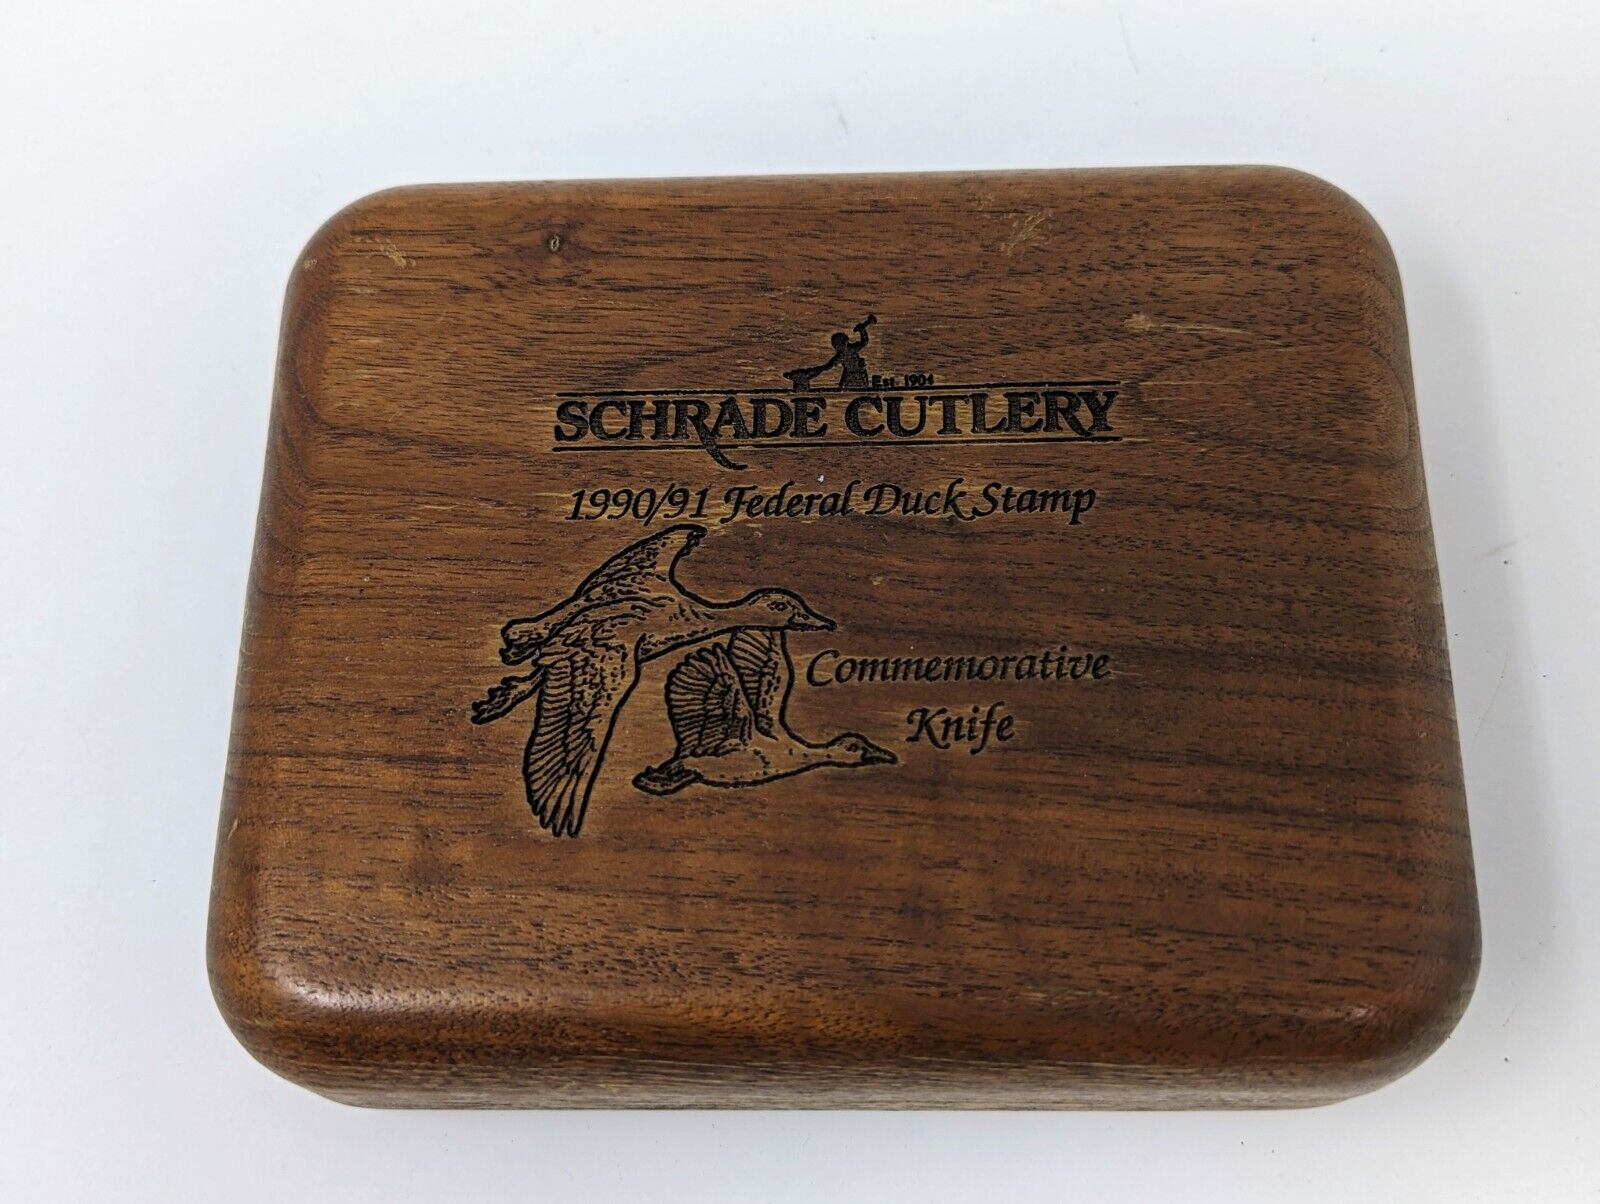 LIMITED EDITION SCHRADE 1990/91 Federal Duck Stamp Commemorative NO KNIFE